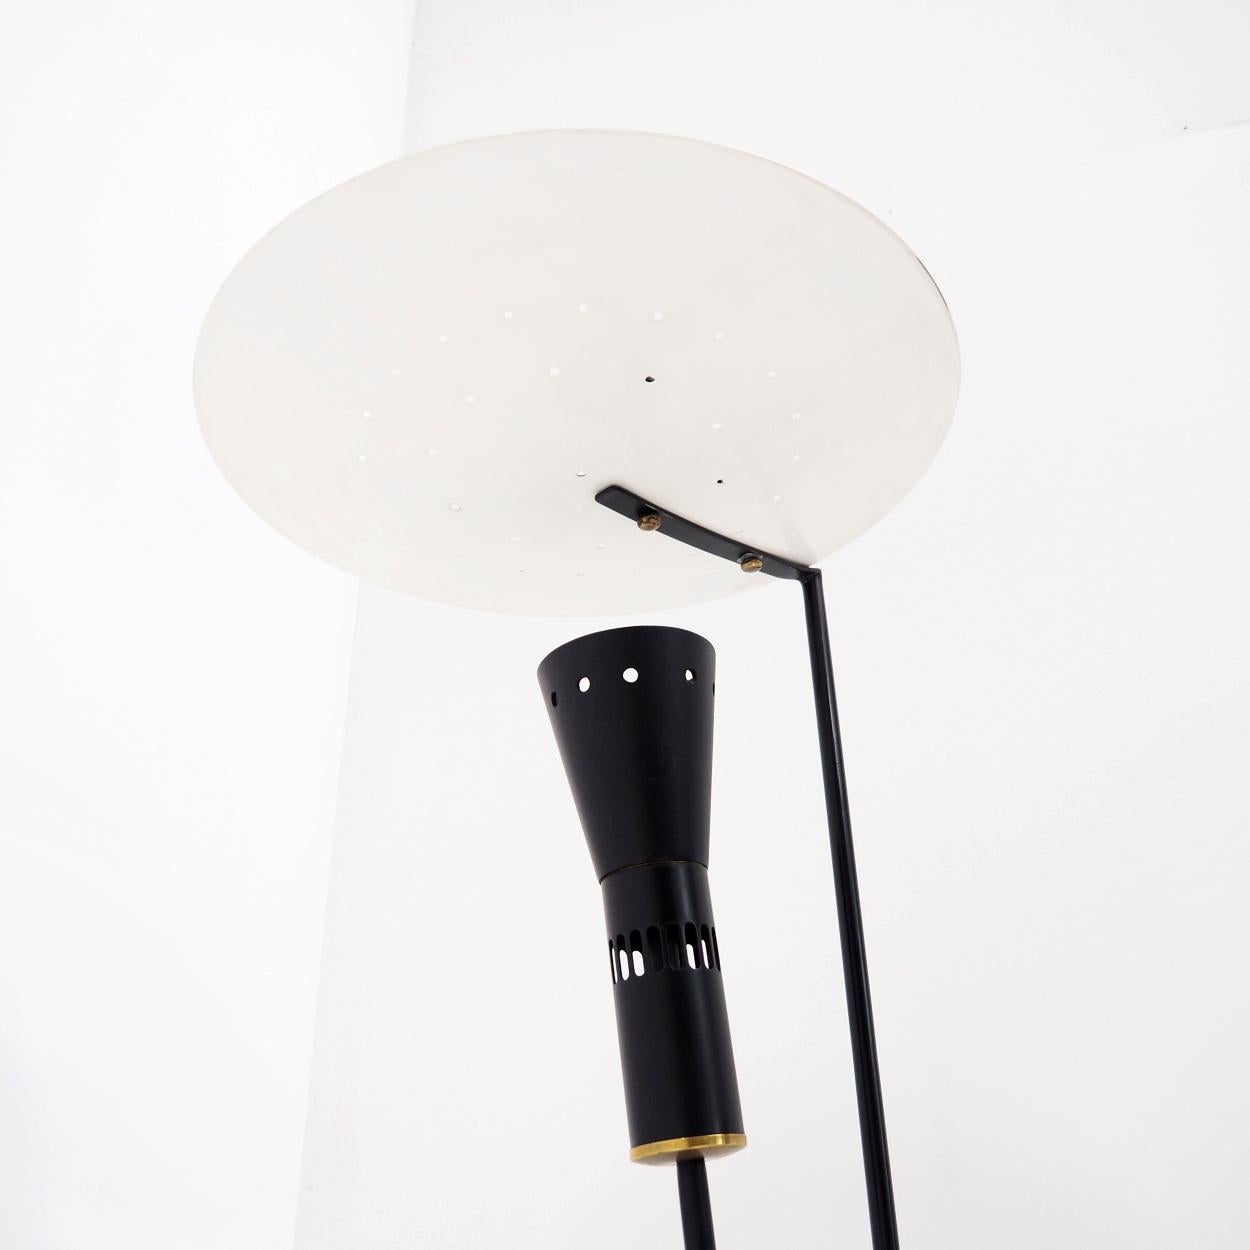 Floor lamp in the style of the ‘B211’ floor lamp by Michel Buffet.

This lamp is probably made in the 1970s or 1980s and in very good condition. It’s made of a metal base and reflector, with a hard plastic uplighter. The designer and manufacturer